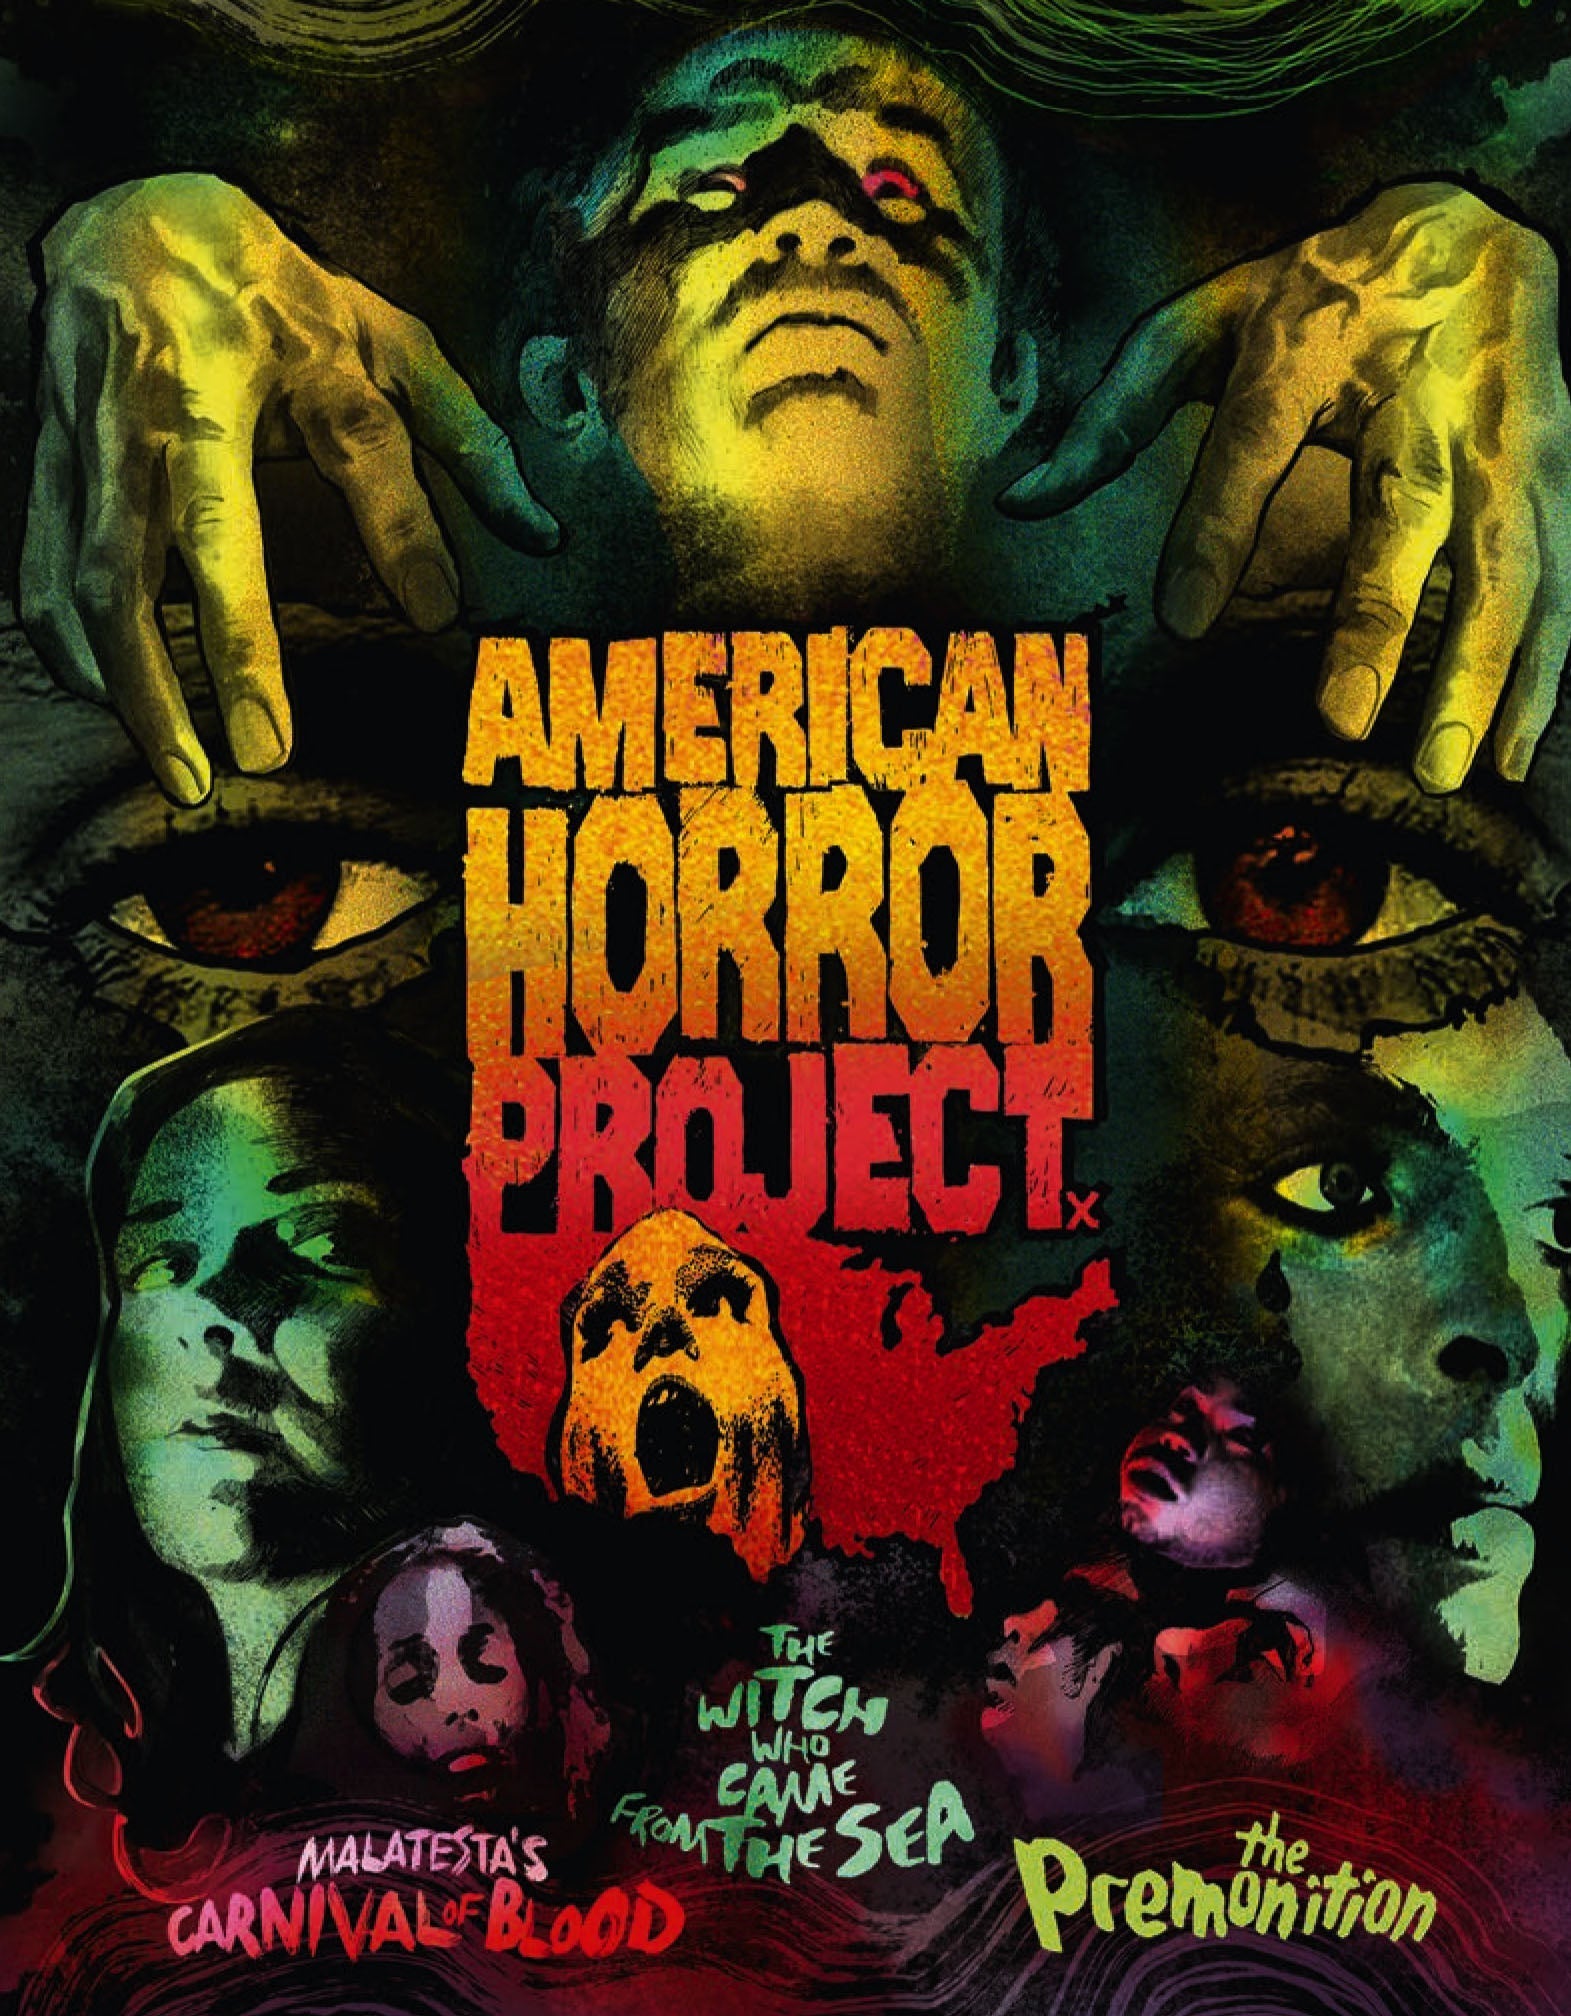 American Horror Project Volume 1 (Limited Edition) Blu-Ray/dvd Blu-Ray